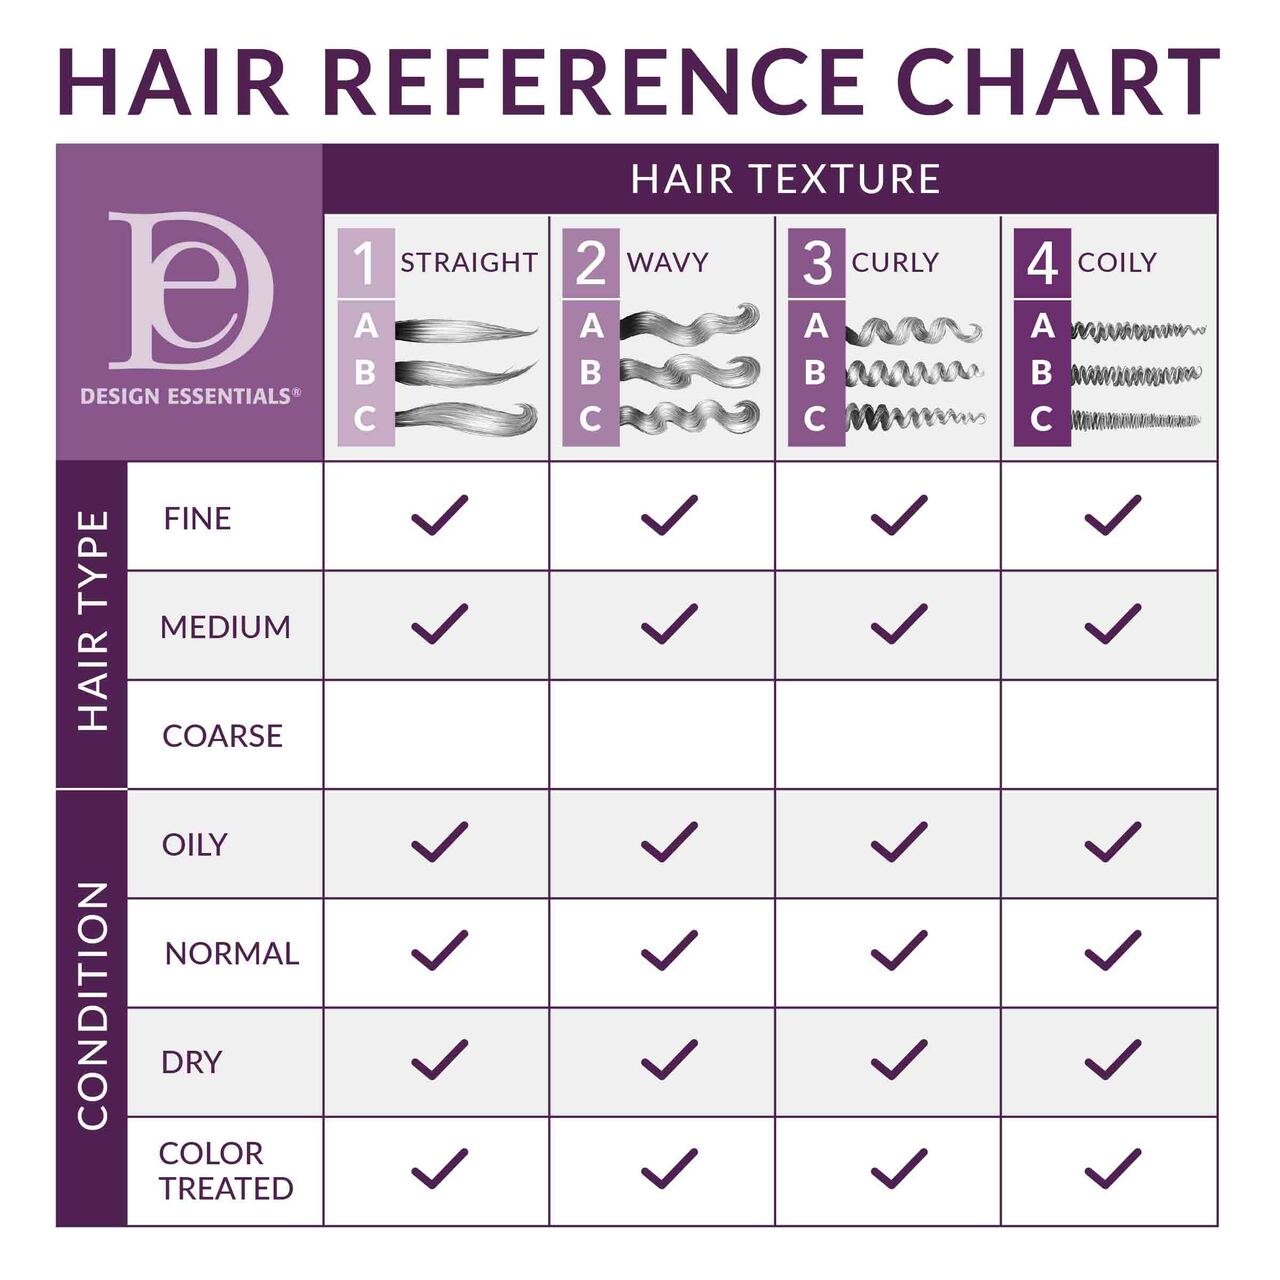 Bamboo_Silk_HCO_Leave-In_Conditioner_-_Hair_Reference_Chart__54086.1632425449